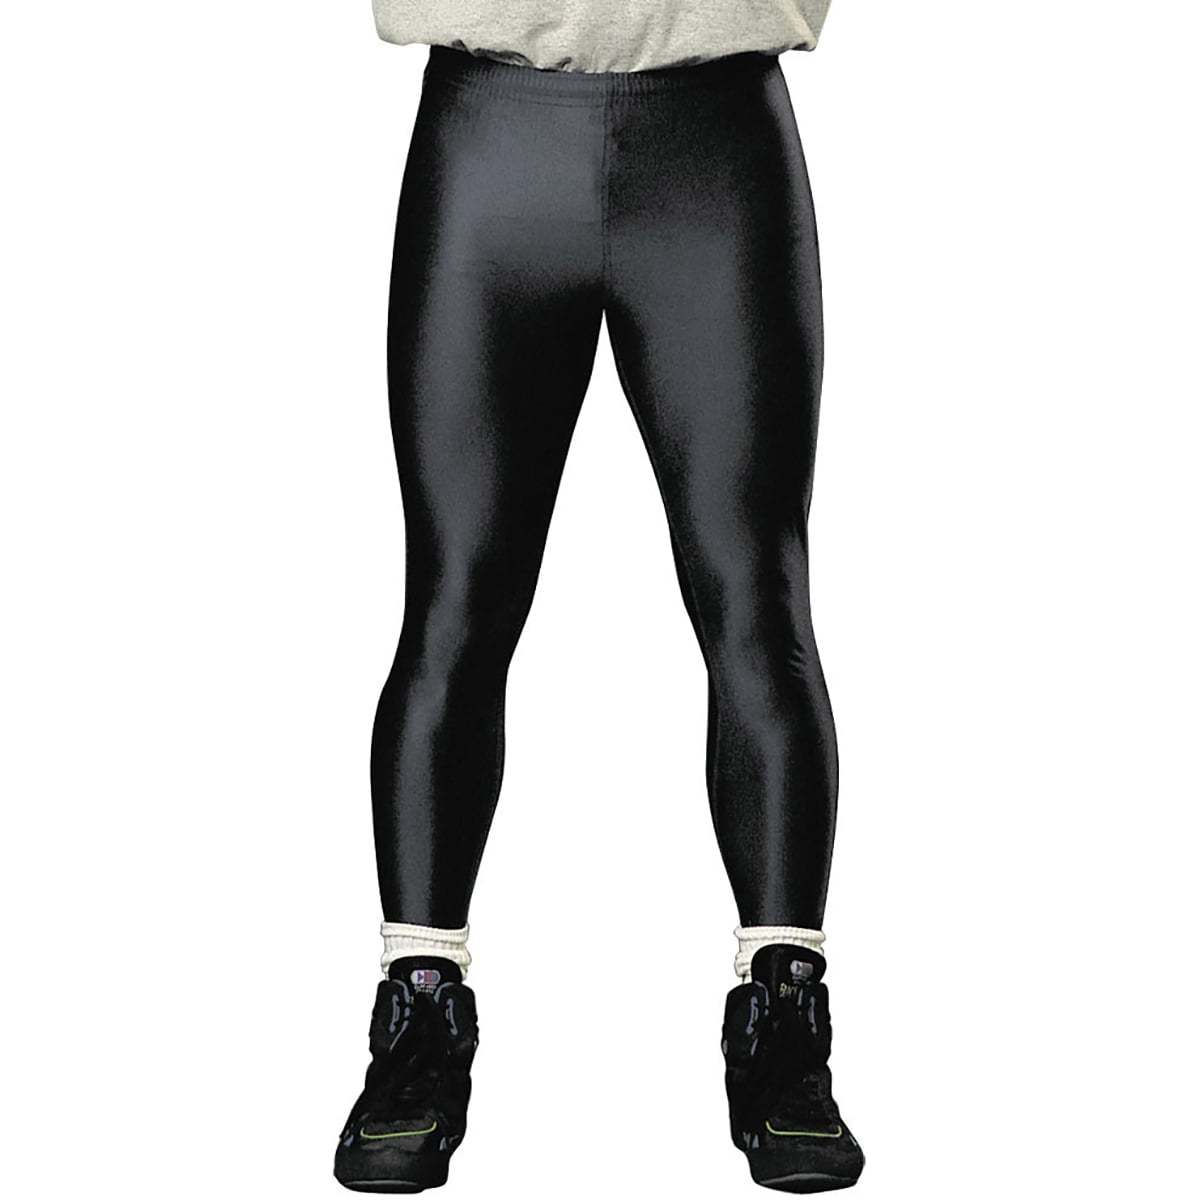 Cliff Keen The Force Compression Gear Wrestling Tights - Medium - Black